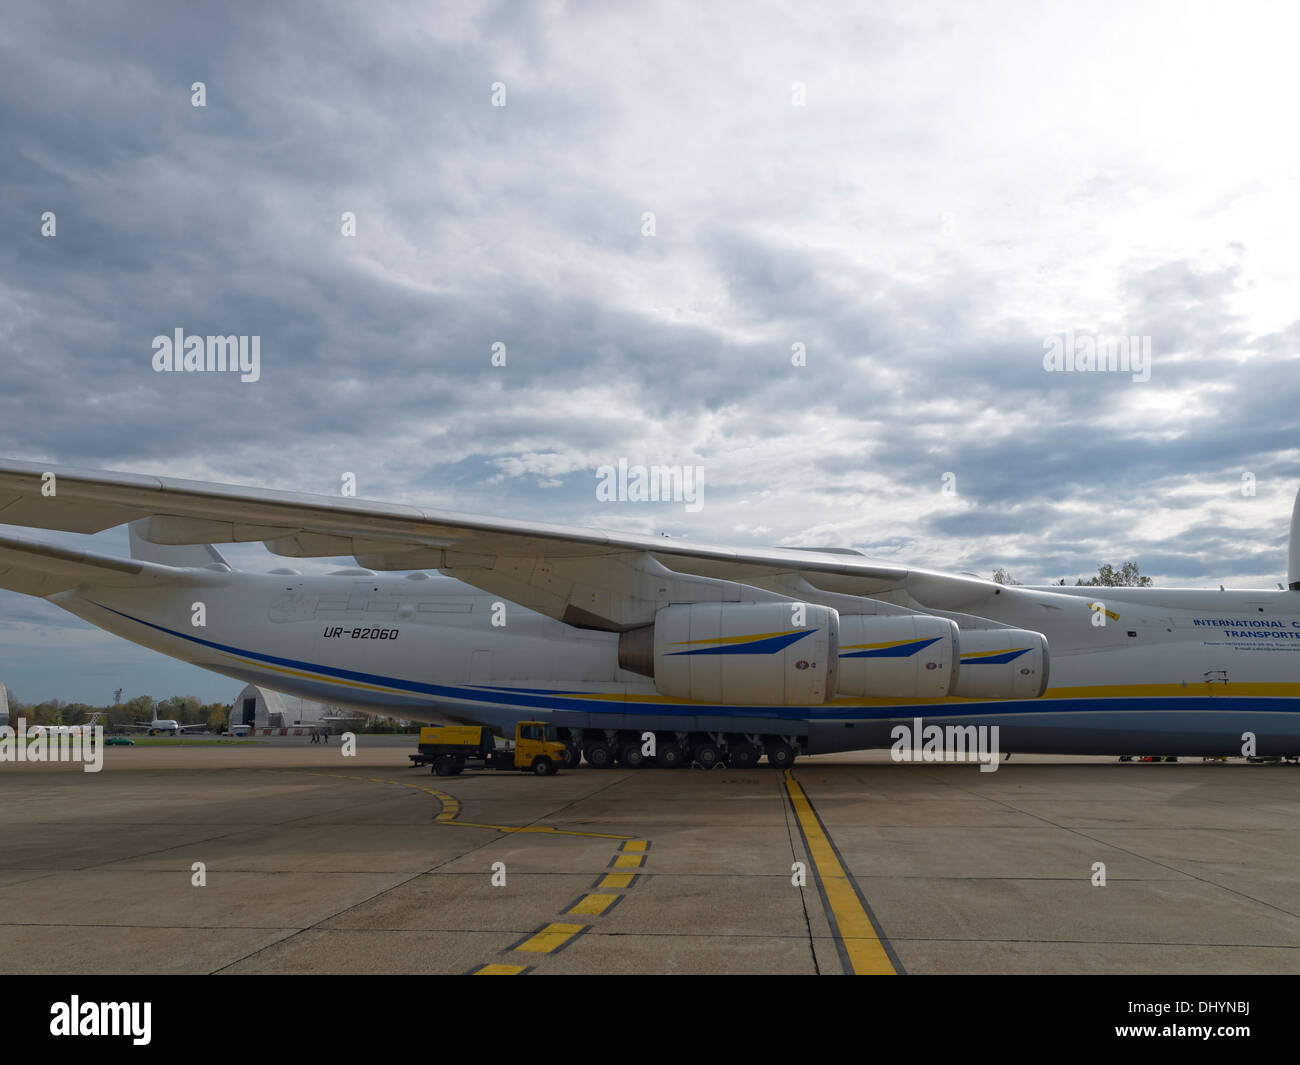 Service truck (power generator) s just by the side of the Antonov An-225 airplane for size comparison. Stock Photo